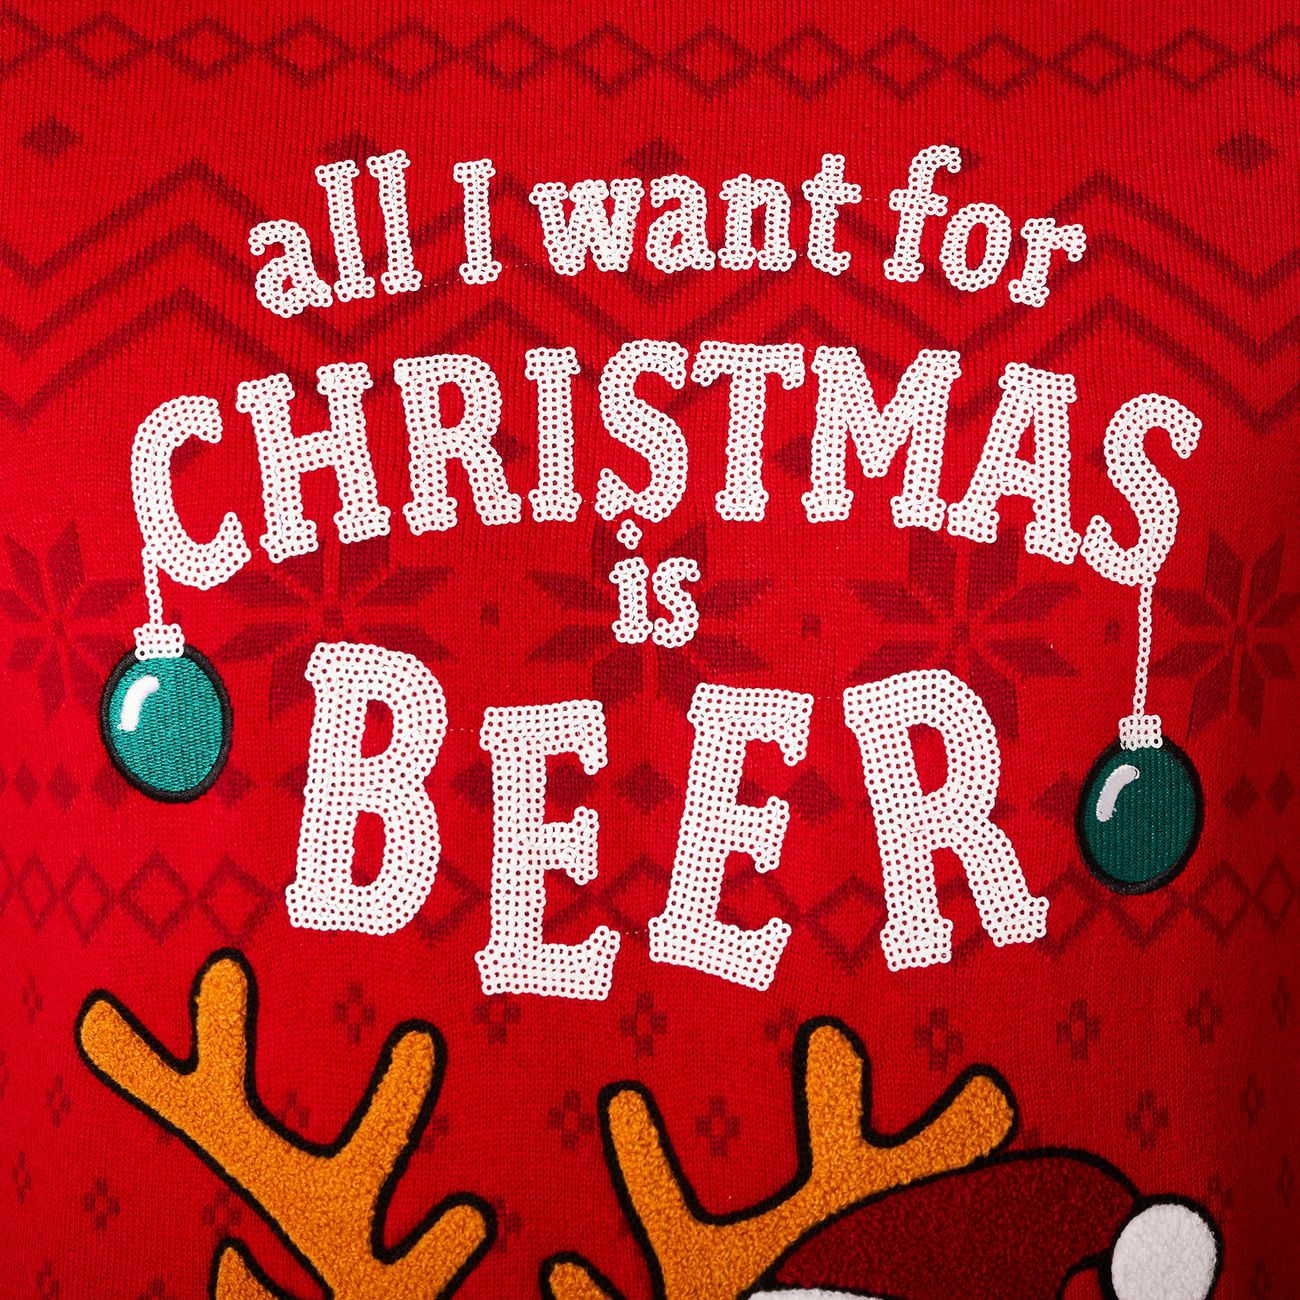 all-i-want-is-beer-jultroja-99320-19